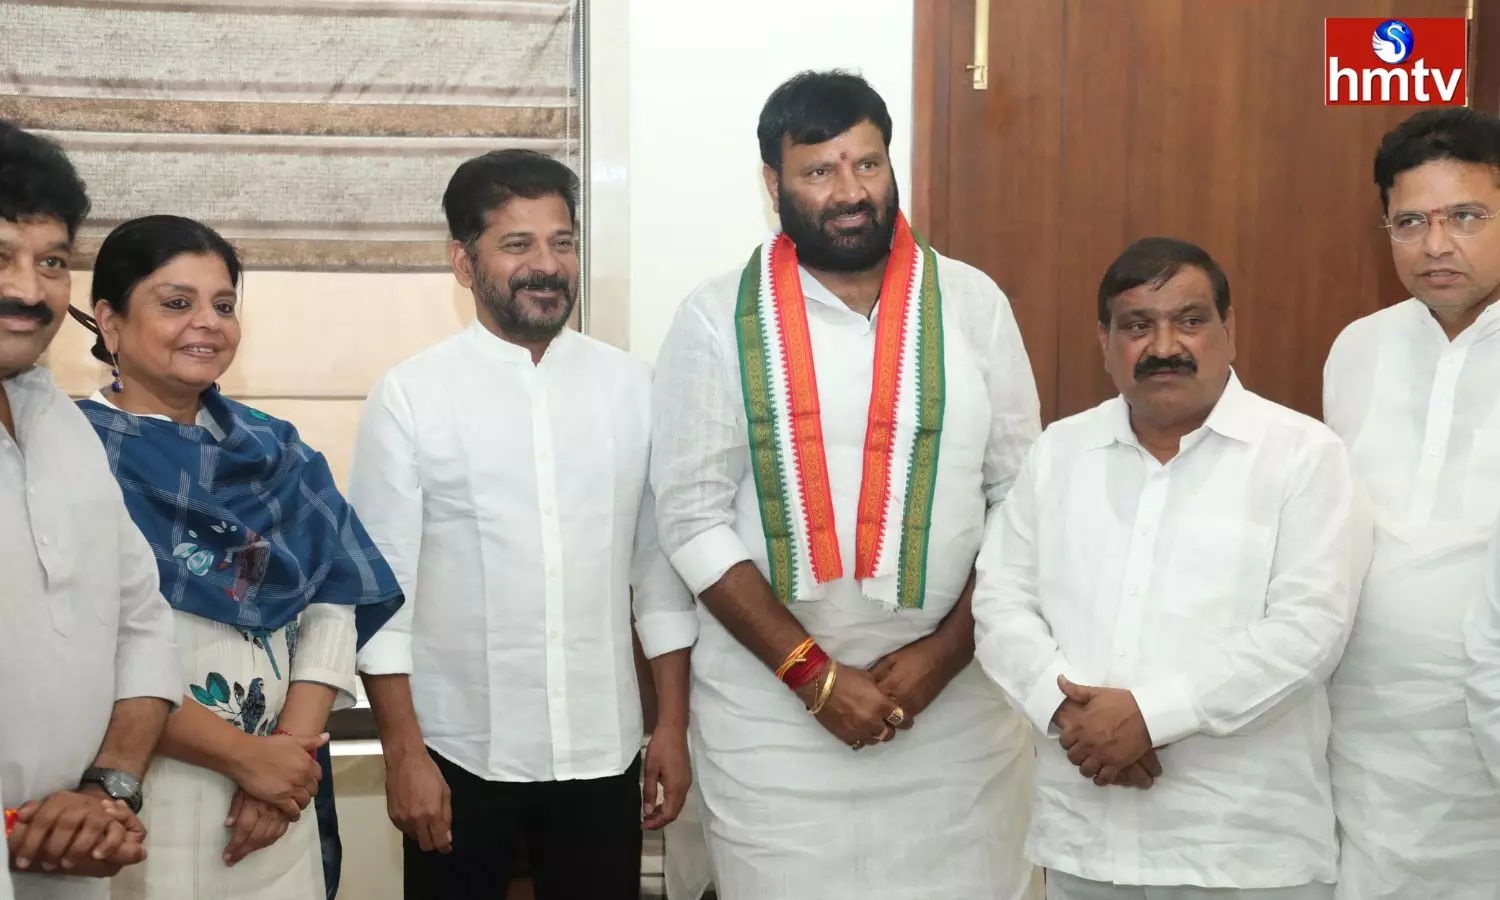 Kuna Srisailam Goud Joined the Congress